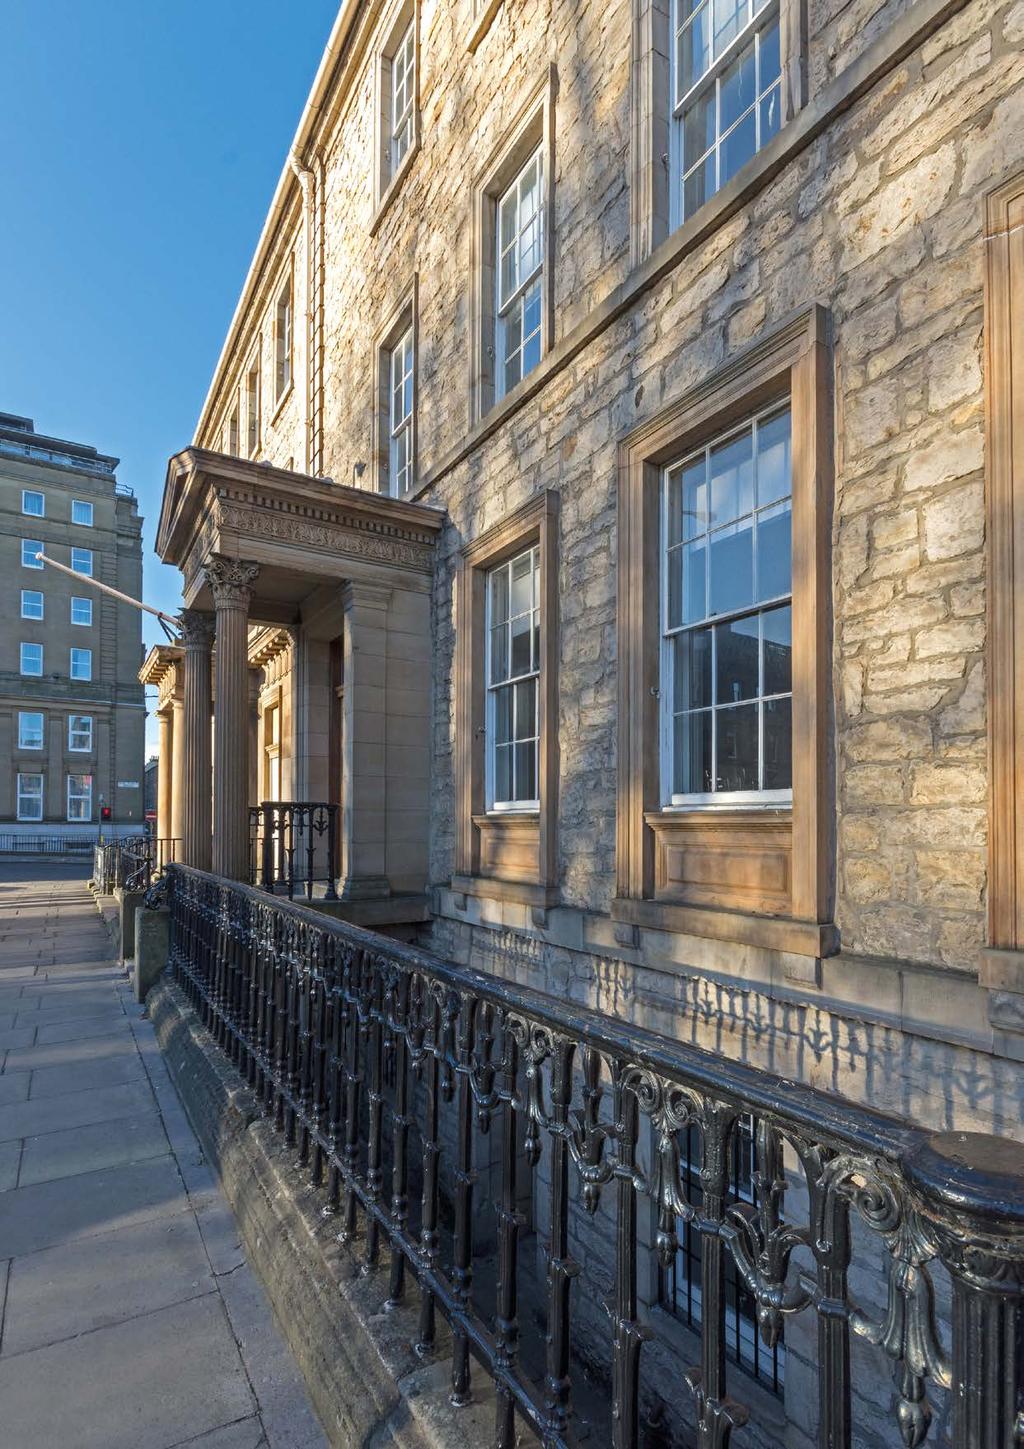 17 Hotels Buchan House, Edinburgh High profile history Buchan House, Edinburgh Harrison s expertise in taking run down or at risk historic buildings and giving them new life and purpose is finely